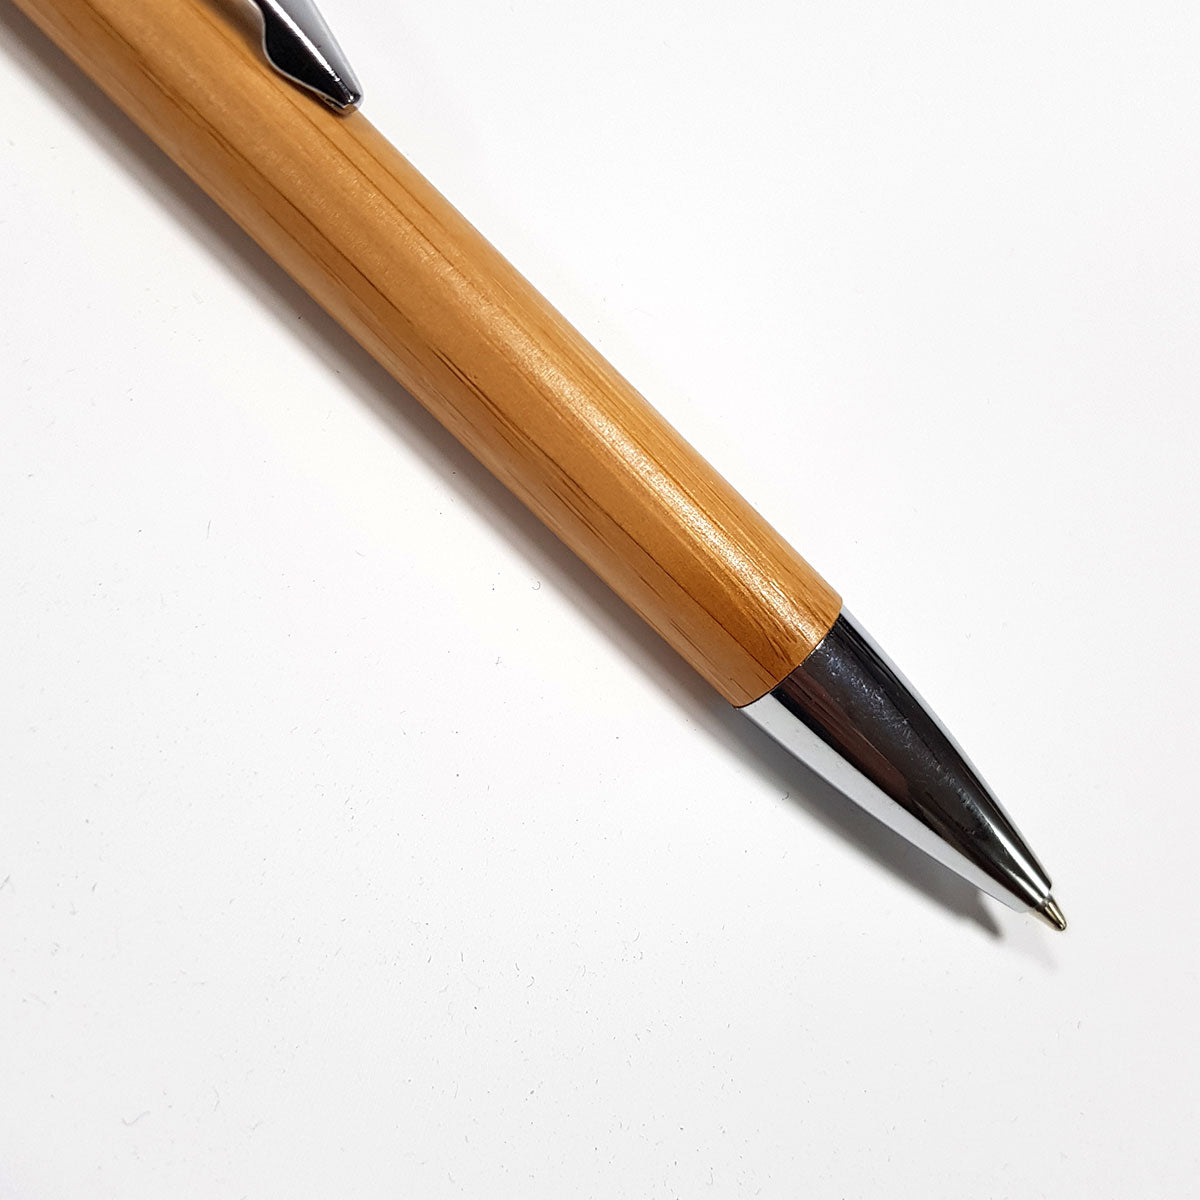 Wooden pen - add your name